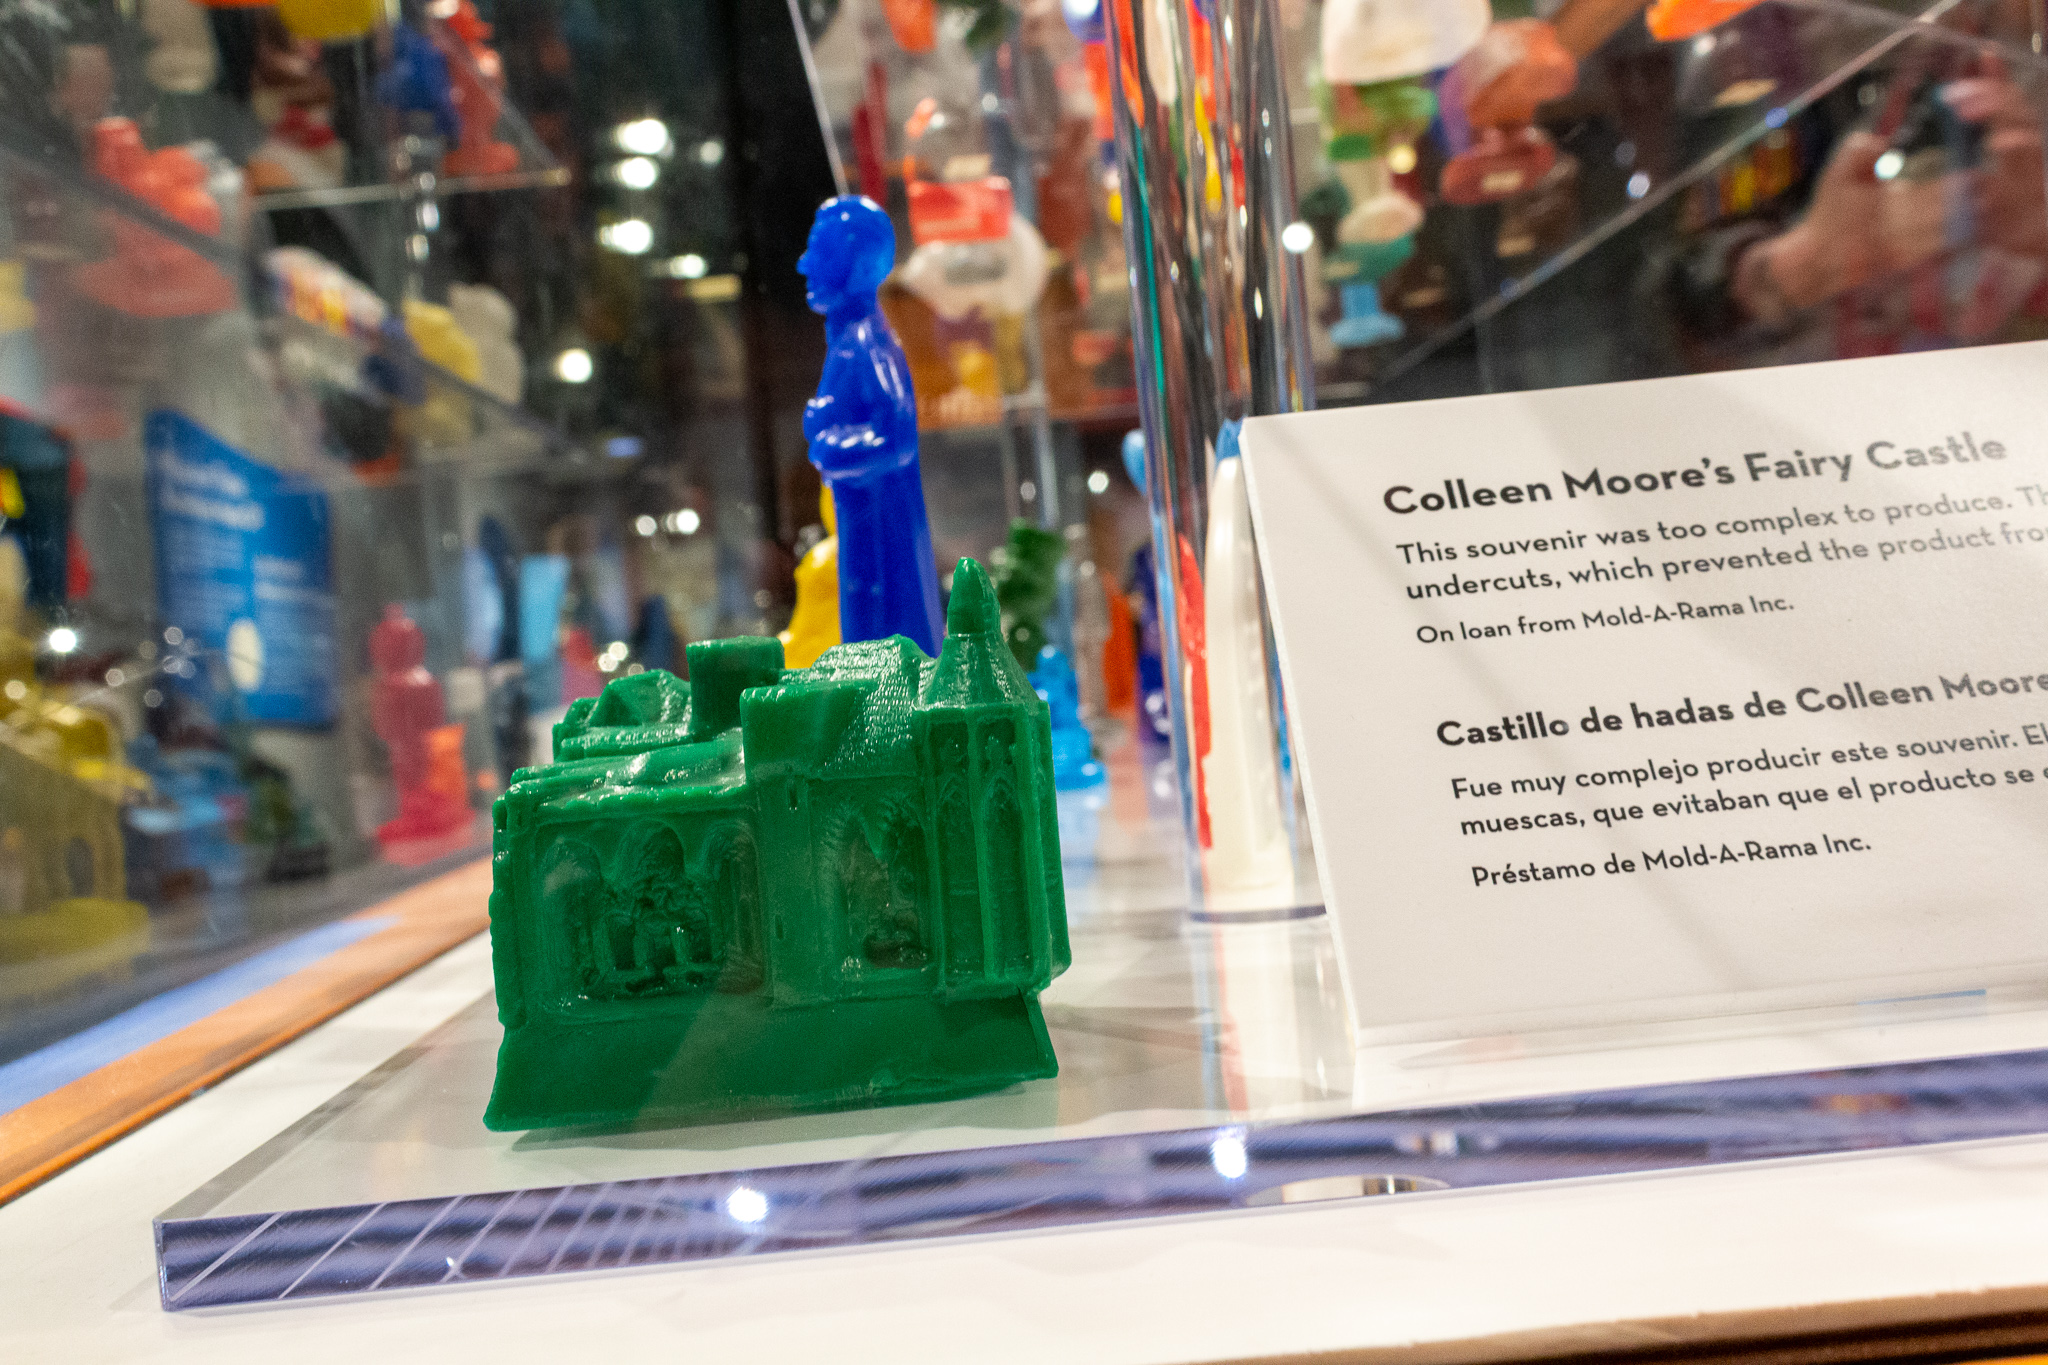 Closeup of a small green plastic figure of a dollhouse and a placard describing it as a mold of Colleen Moore's Fairy Castle